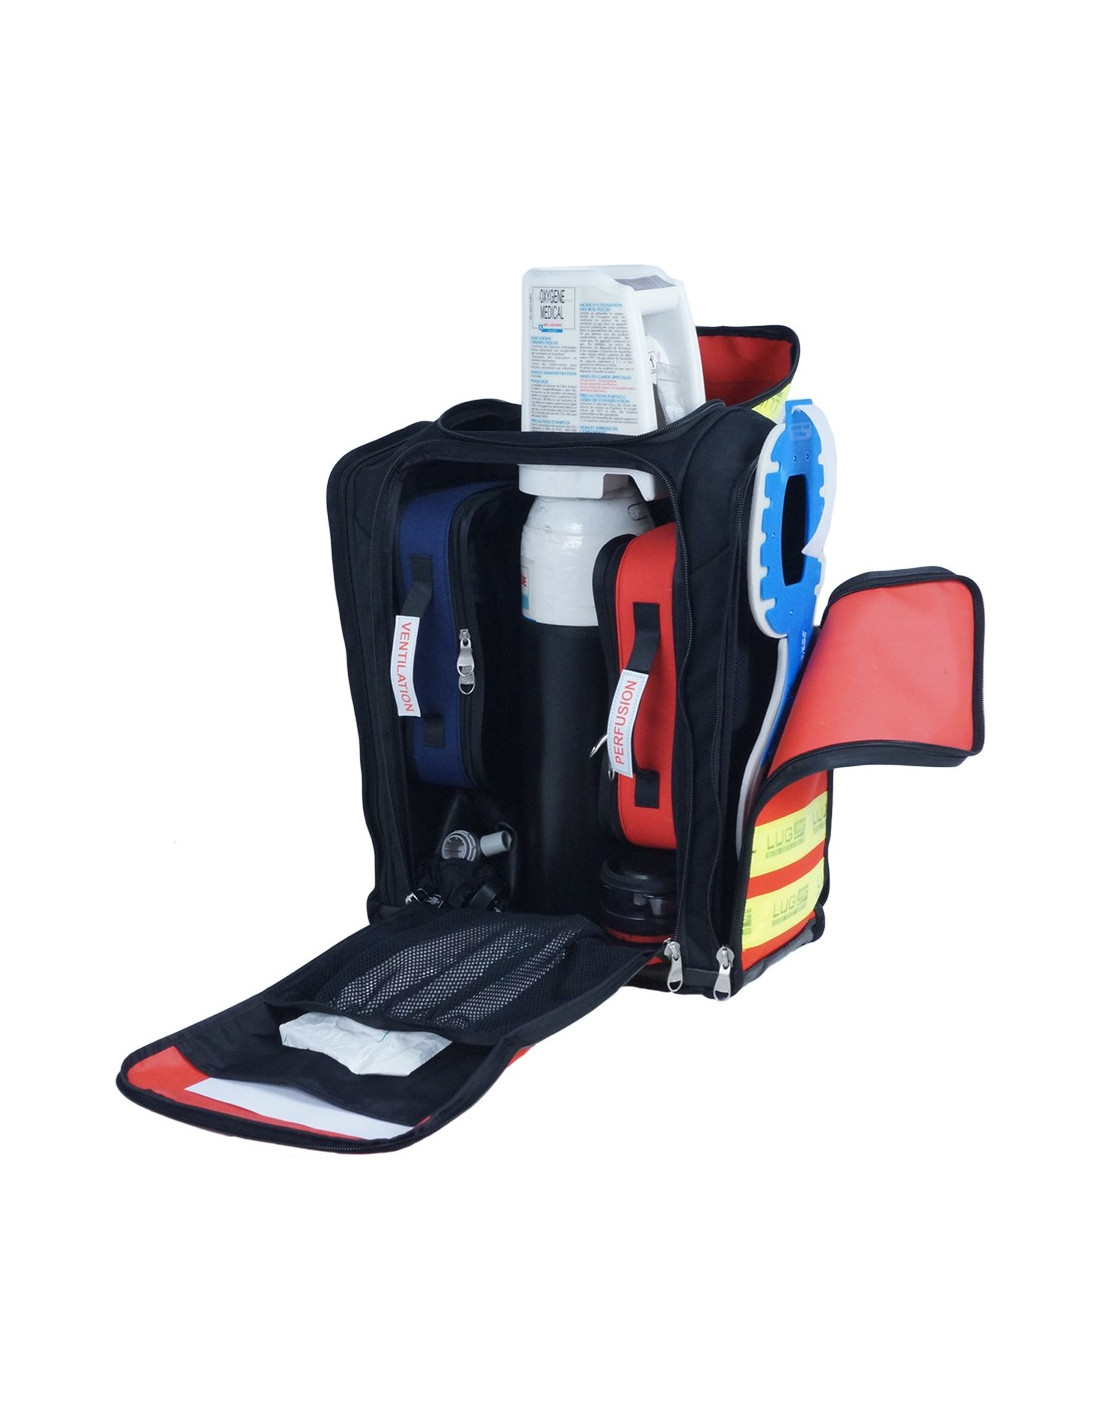 sac-secours-medical-o2-gamme-medicale (1)